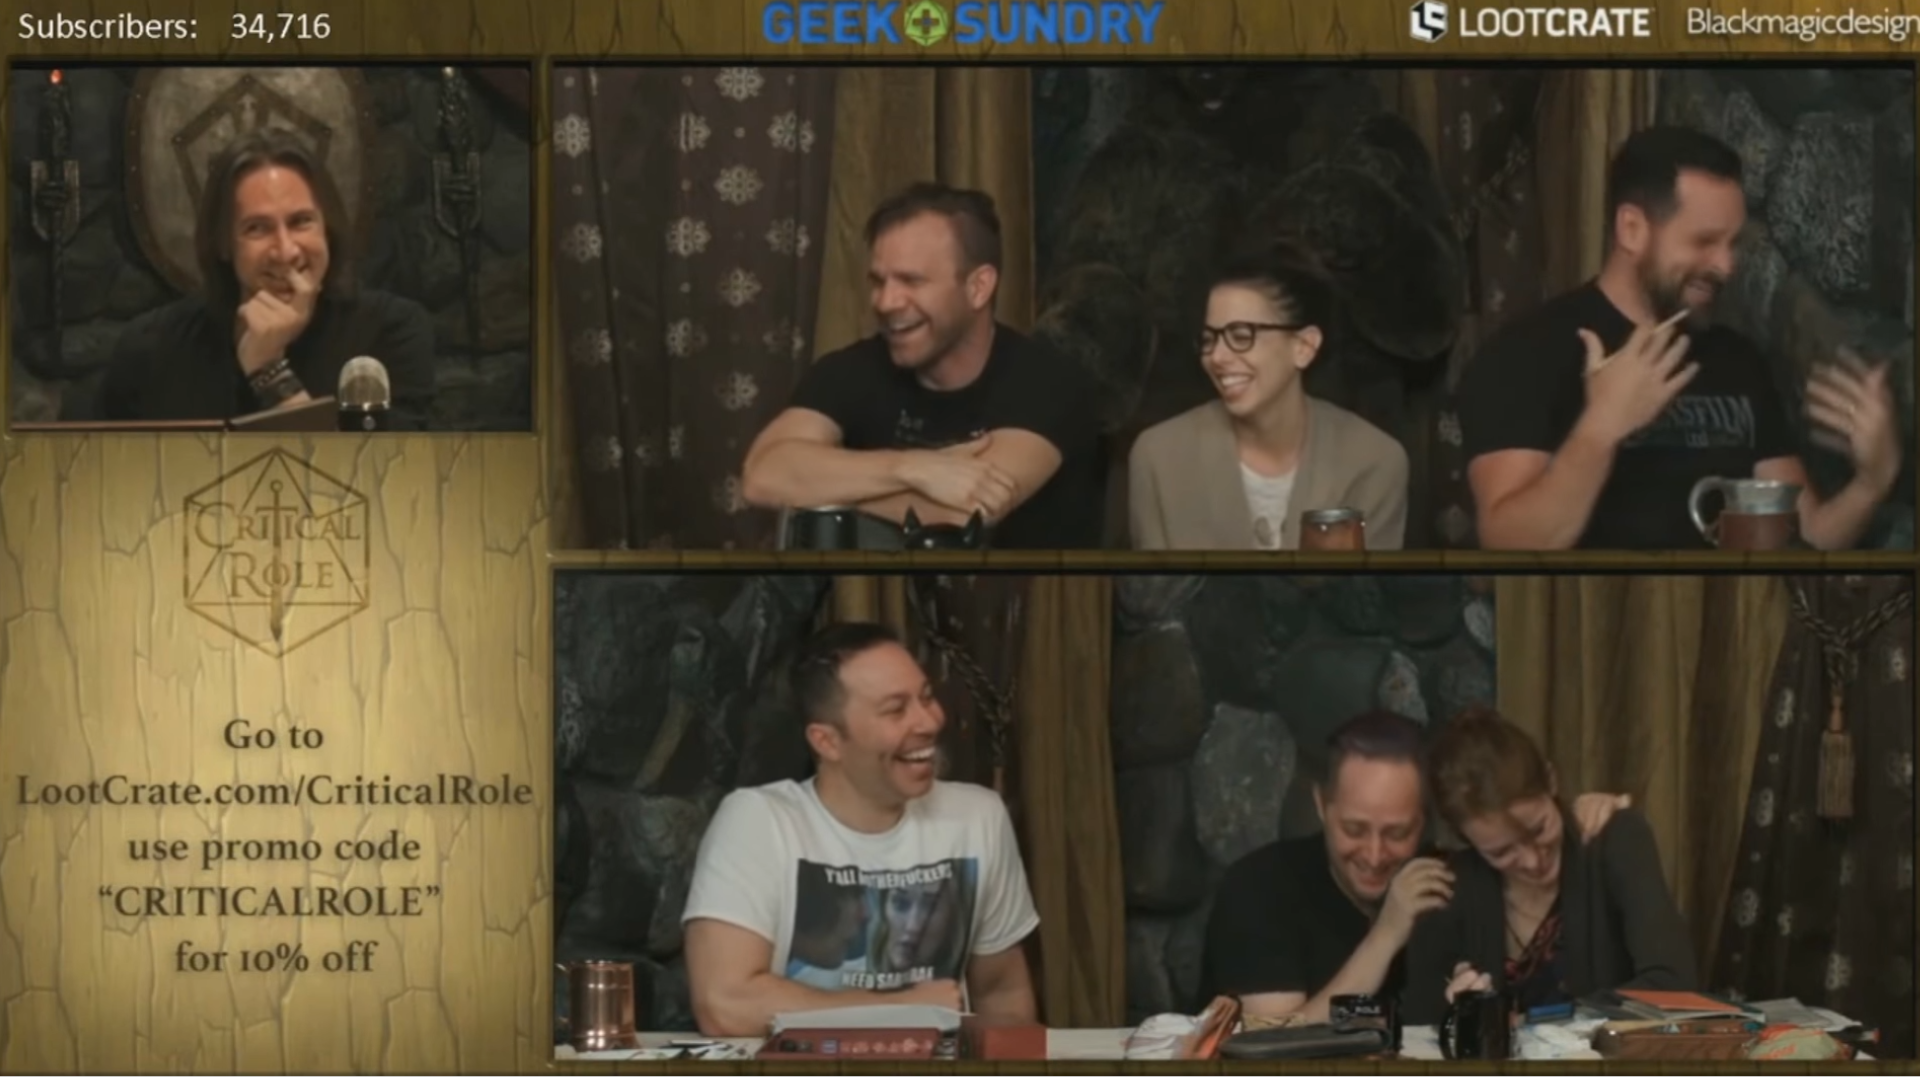 The cast of critical role bust a gut laughing at Taryon Darrington's antics.